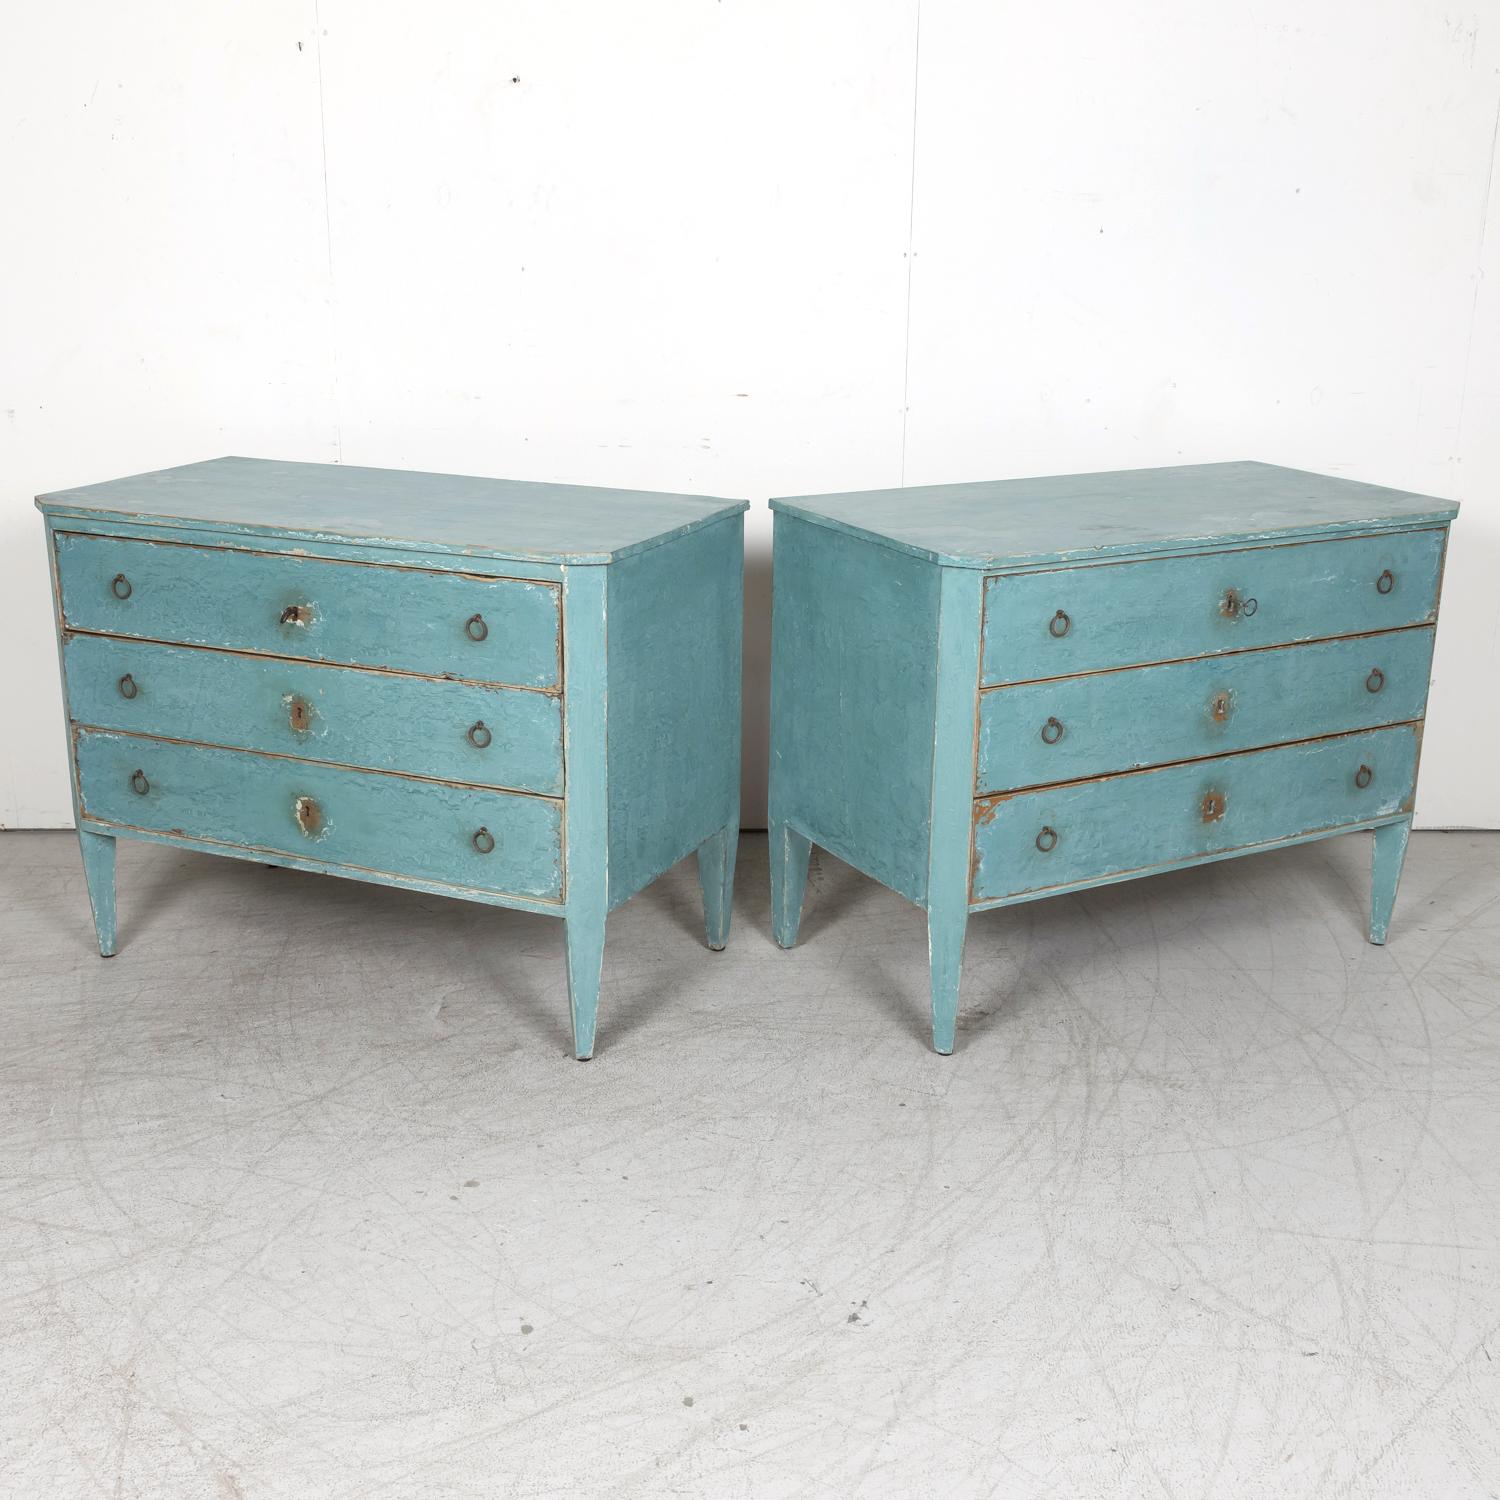 Wood Pair of Late 19th Century French Louis XVI Style Aqua or Teal Painted Commodes